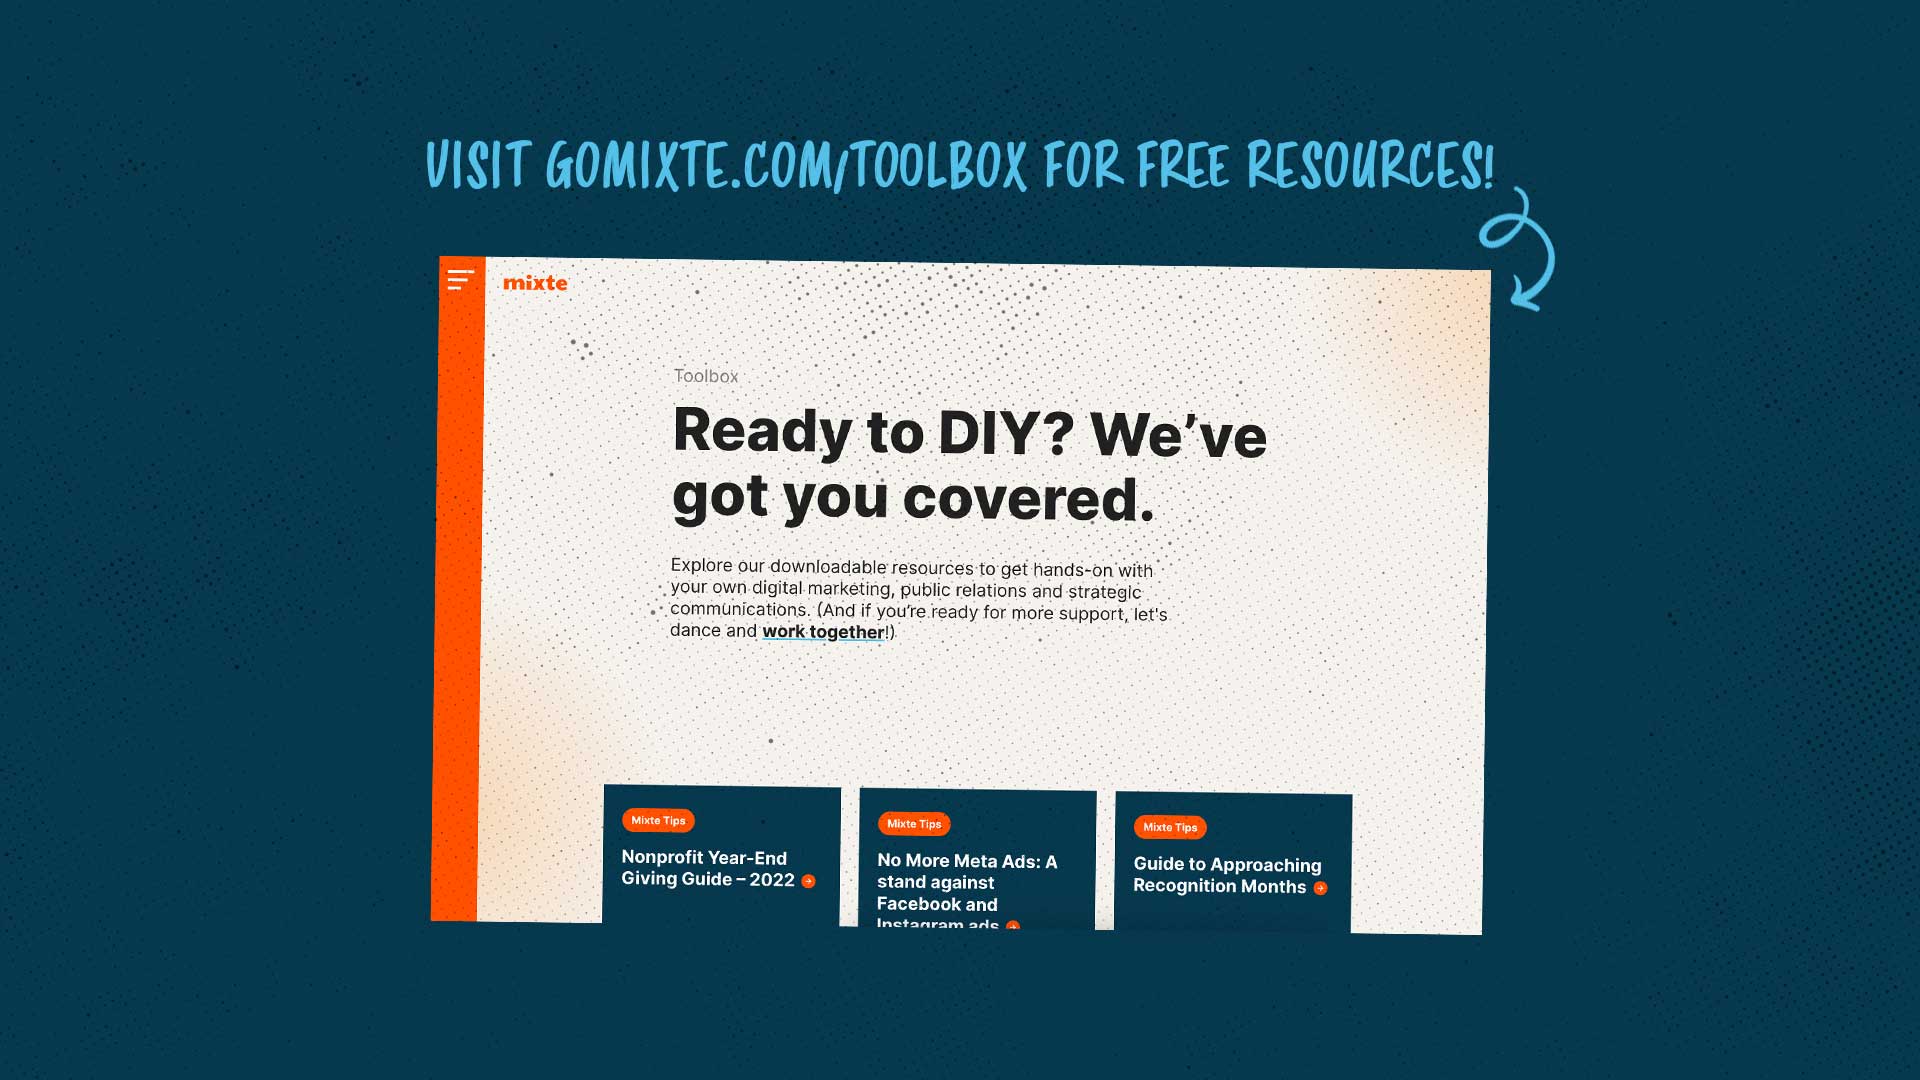 "Visit GoMixte.com/Toolbox for free resources" text pointing to screenshot of webpage